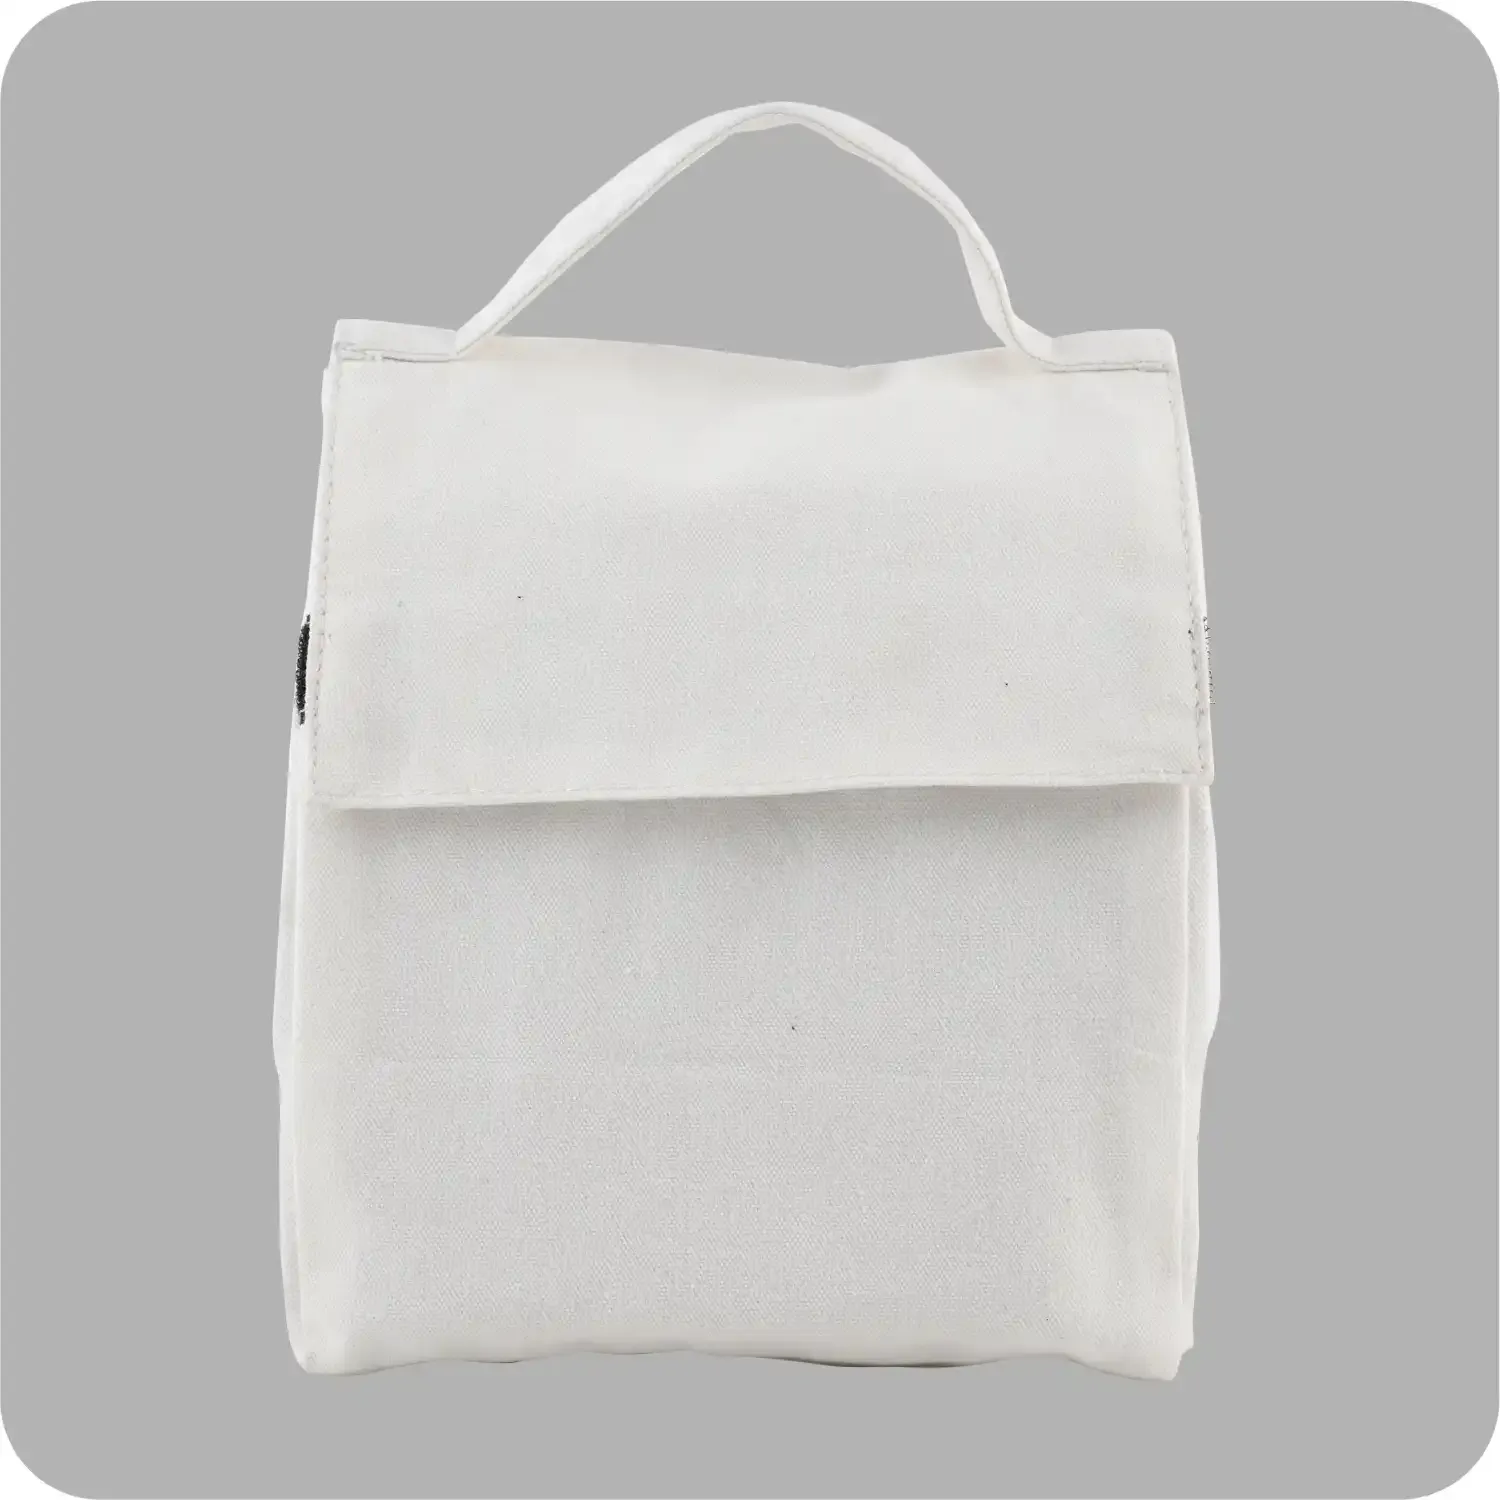 Extremely Lightweight, Chic Look Canvas Bags